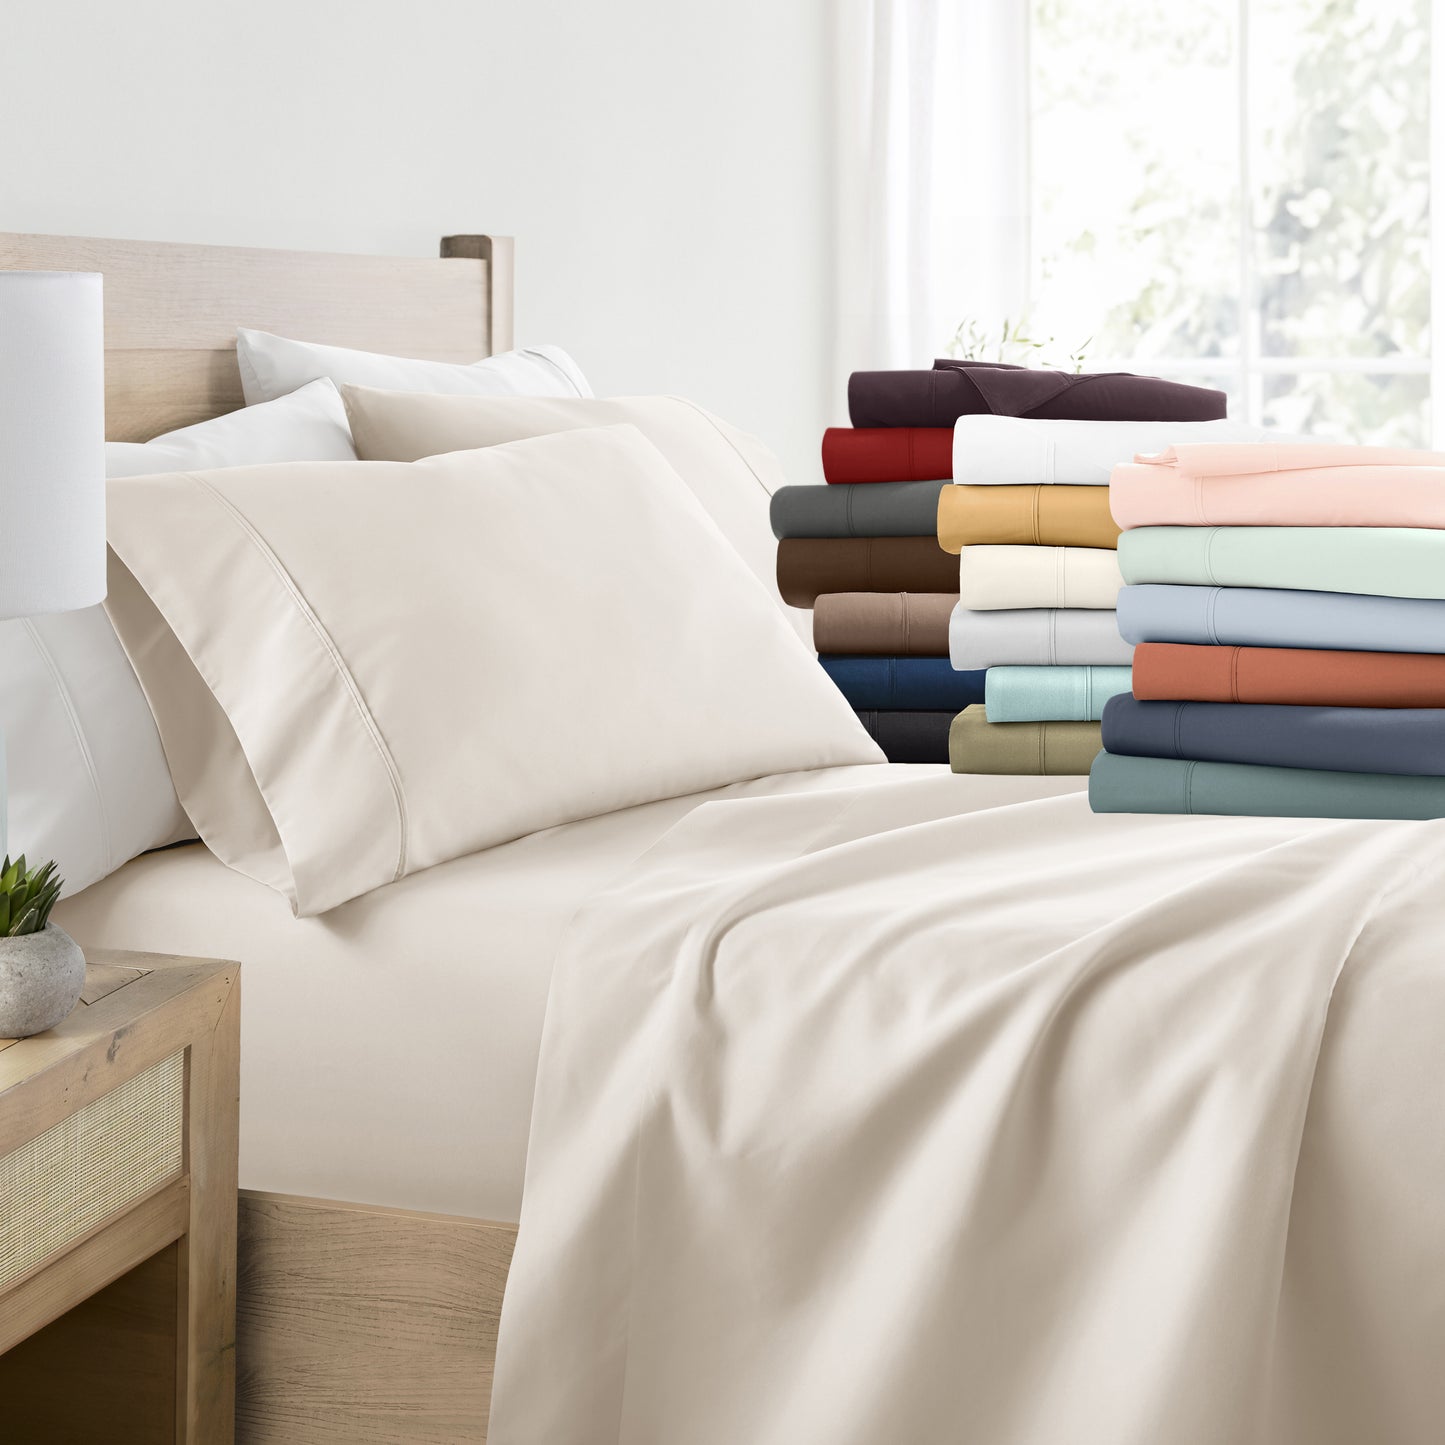 Sheet Sets in Solid Essential Colors